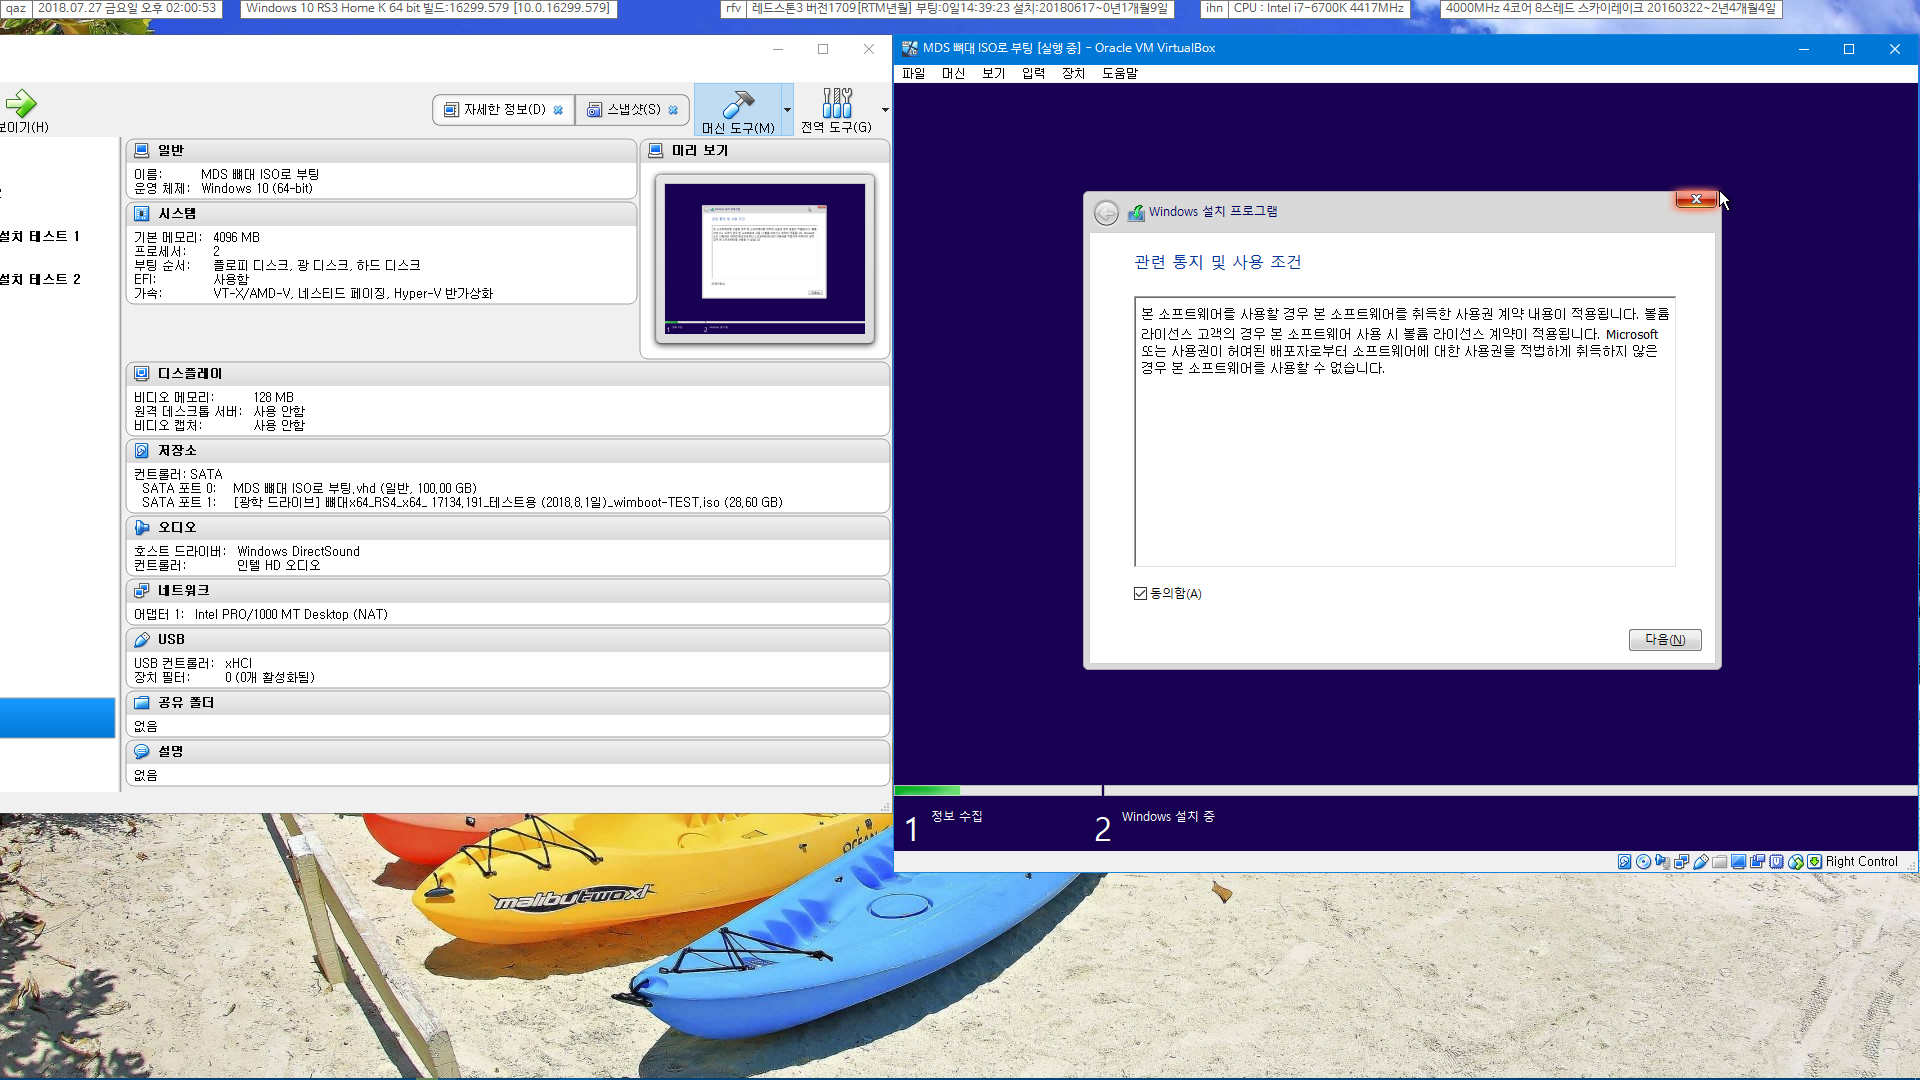 MDS---뼈대x64_RS4_x64_ 17134.191_테스트용 (2018.8.1일)_wimboot-TEST.iso 설치 테스트 - UEFI - 2018-07-27_140053.png